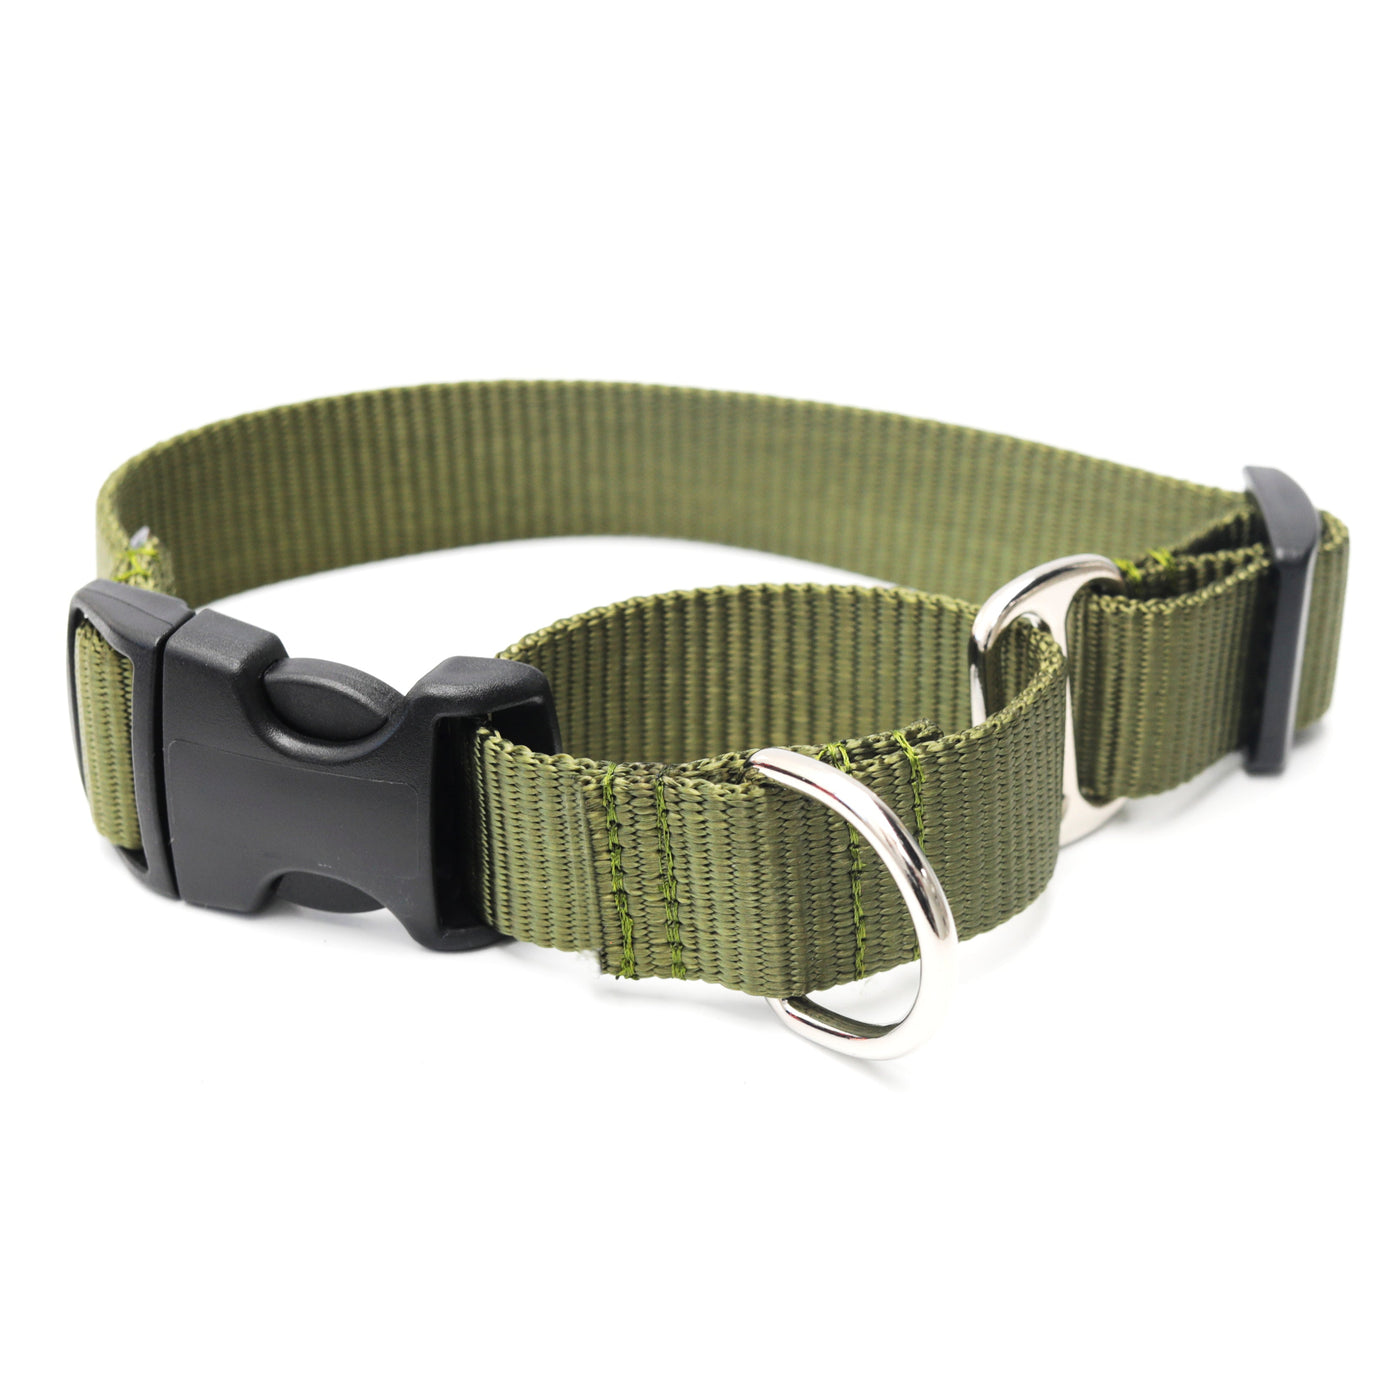 Mimi Green Martingale Personalized Dog Collar Collar Mimi Green Army Green 